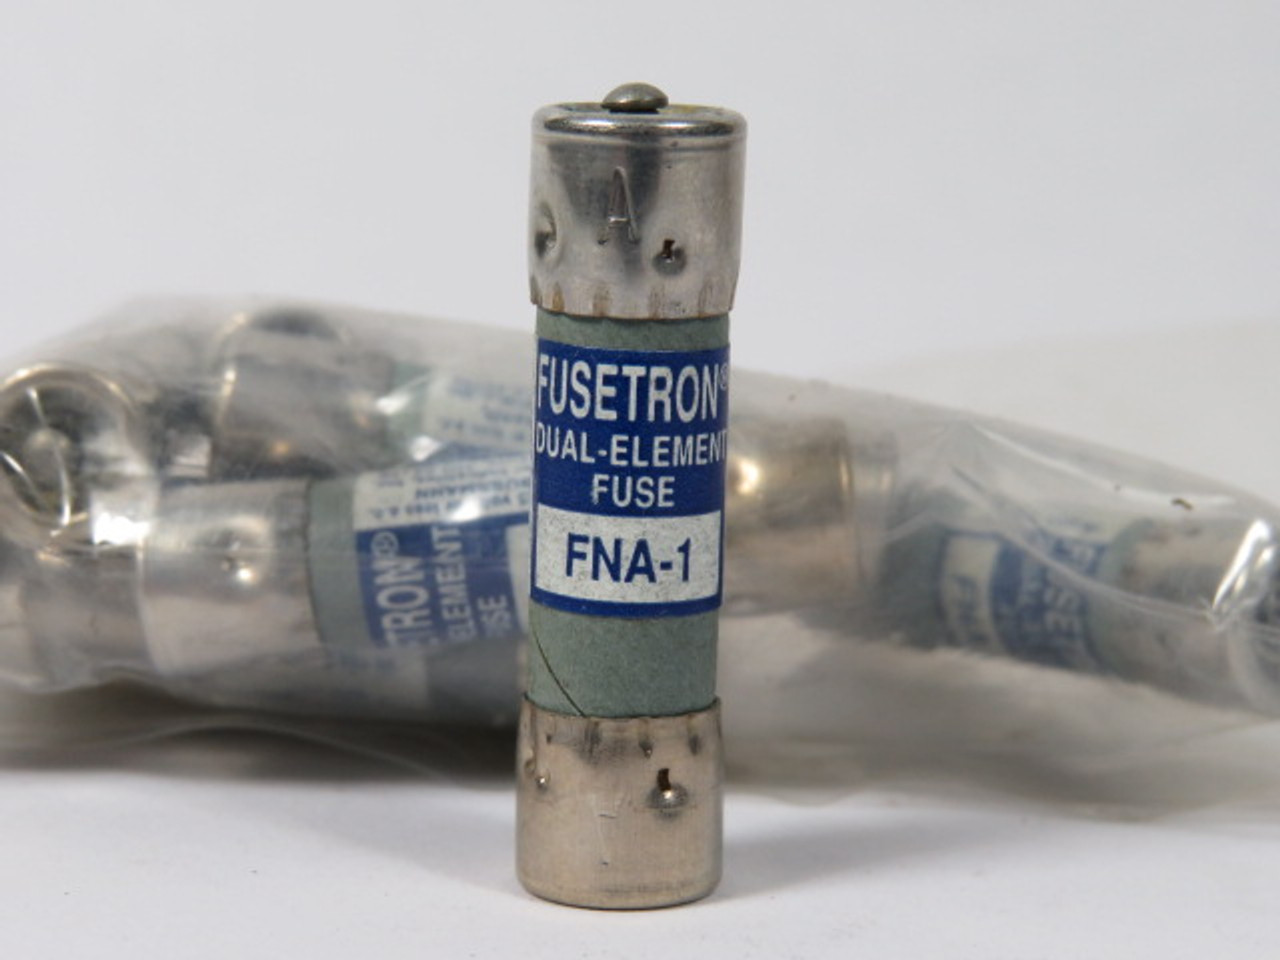 Fusetron FNA-1 Dual Element Fuse 1A 125V Lot of 10 USED